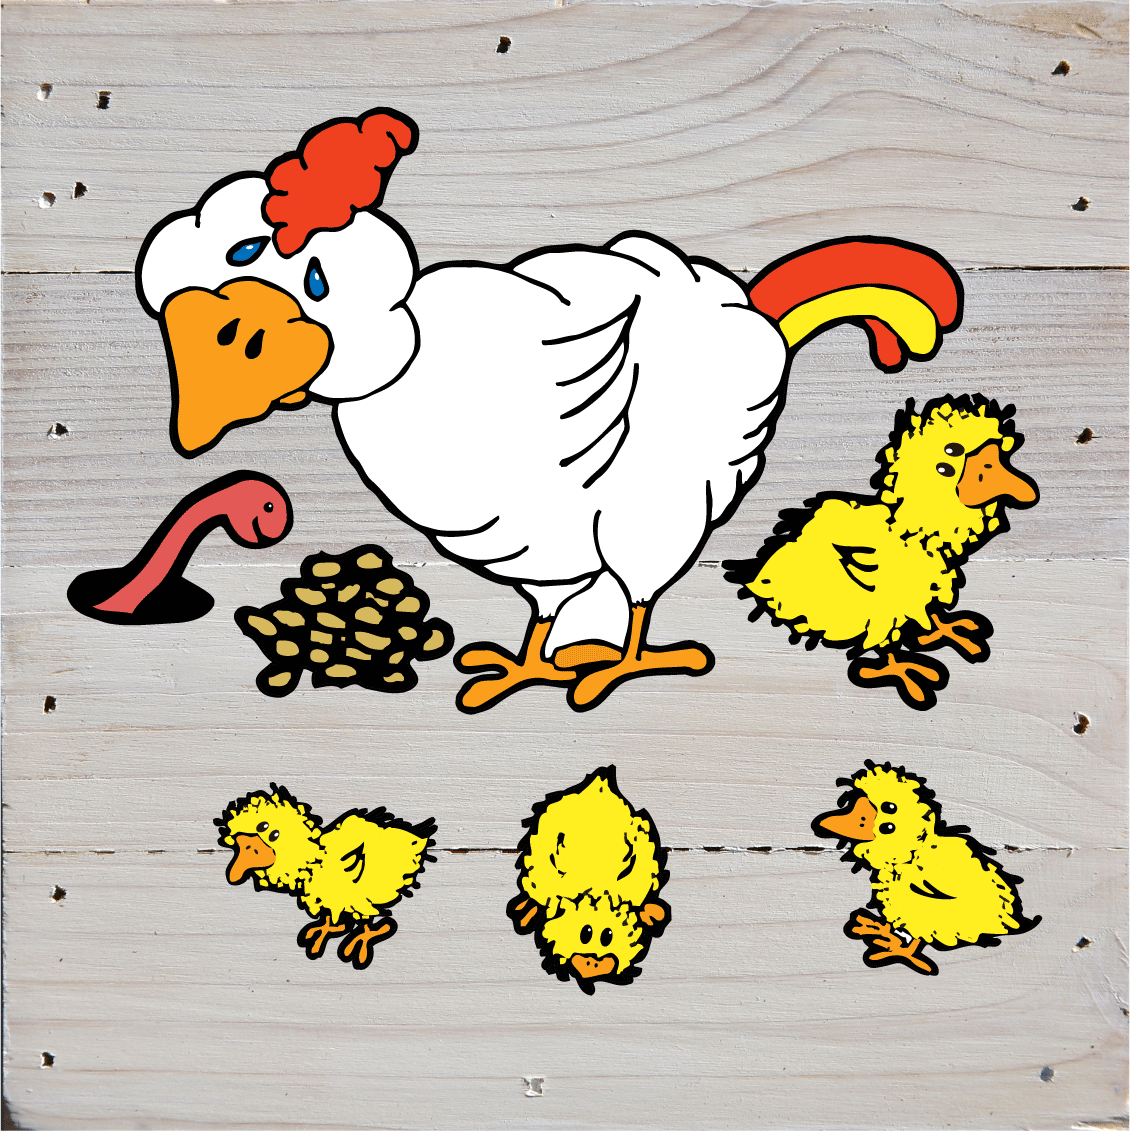 Farm Animal theme Art Prints on a White Washed 6 x 6 Rustic Natural Wood Pallet